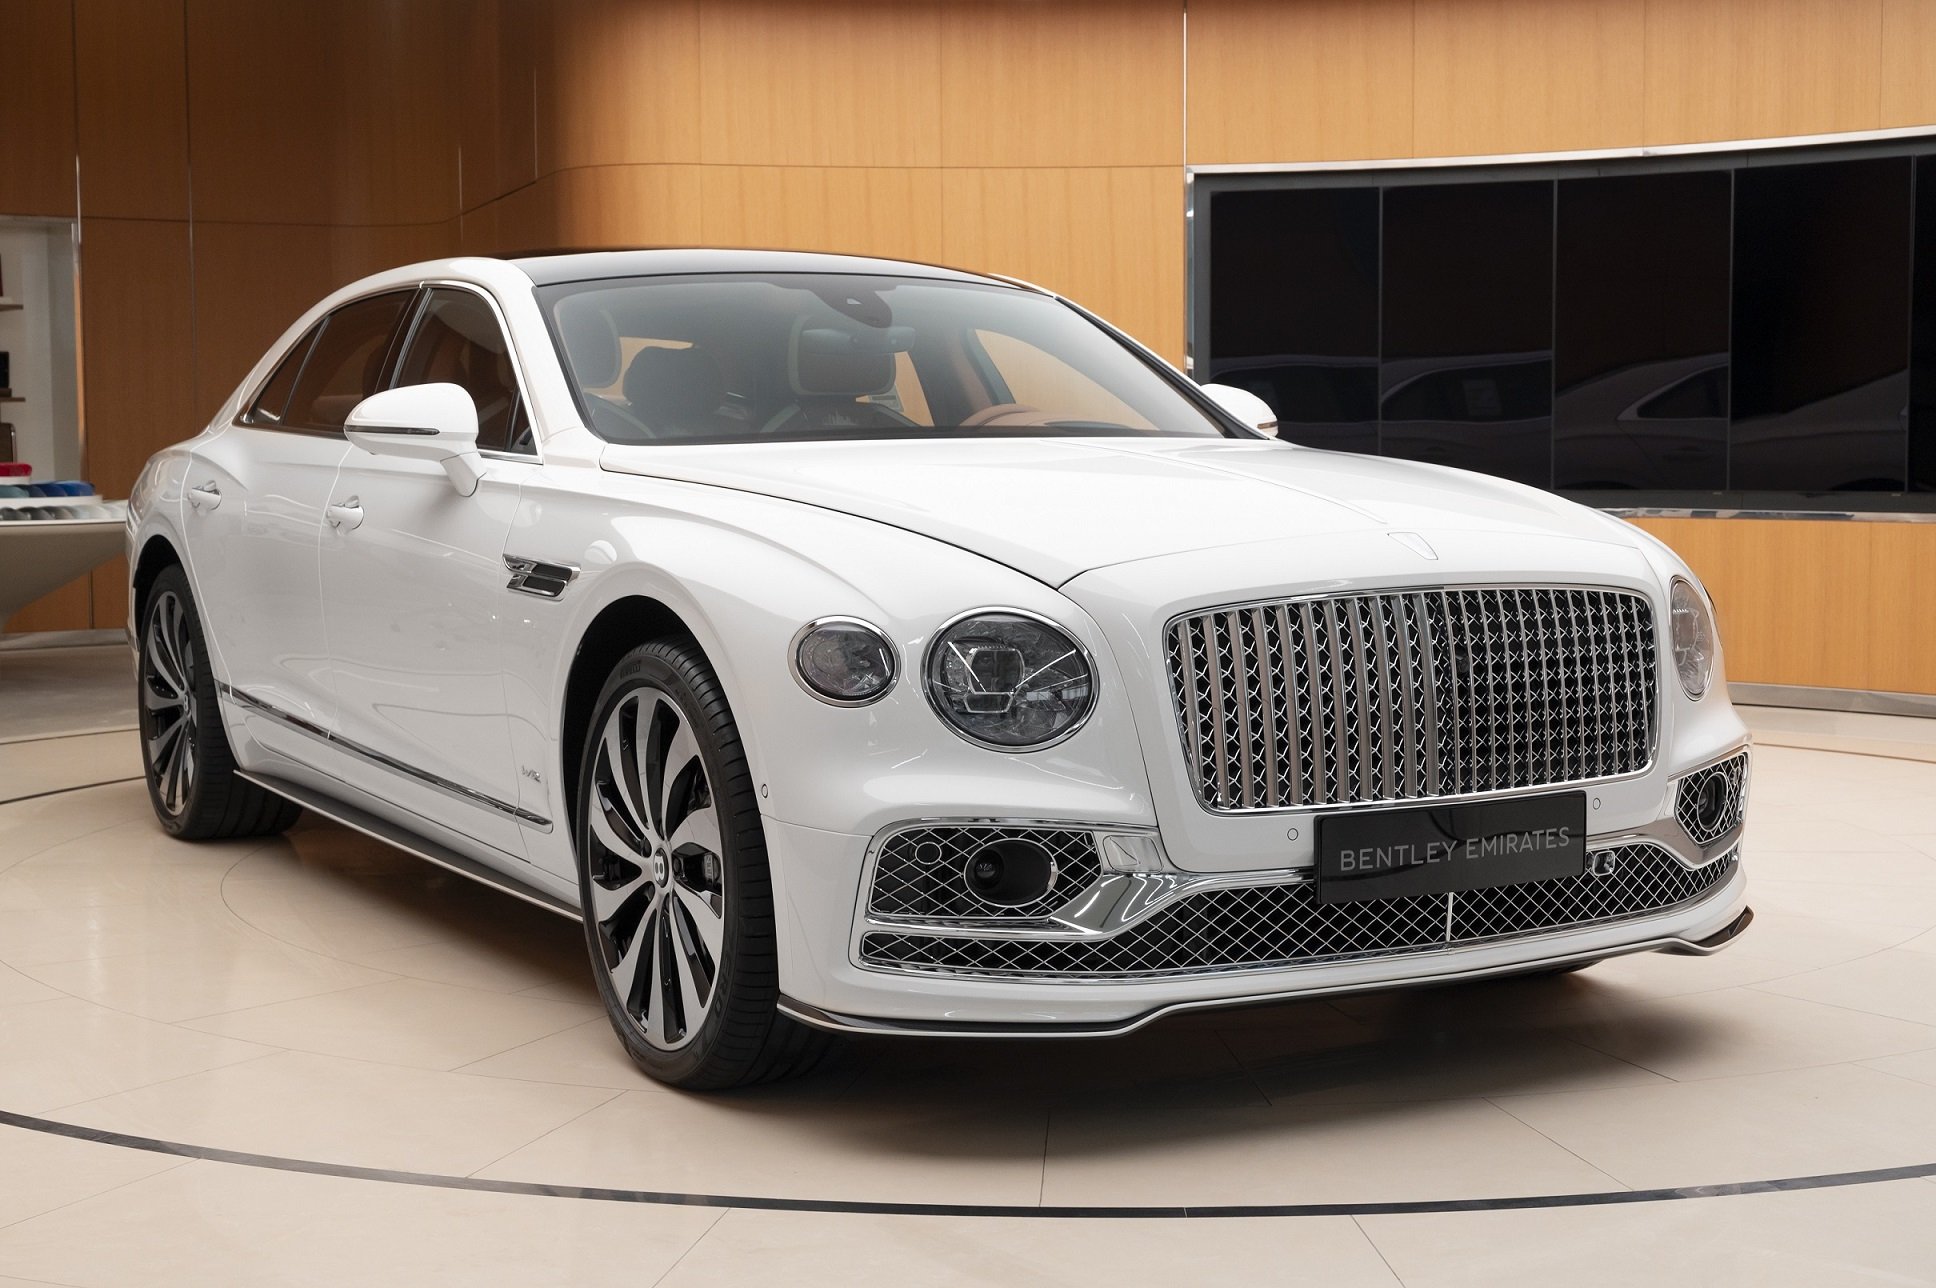 Bentley creates limited edition models inspired by the skylines of Dubai and Abu Dhabi